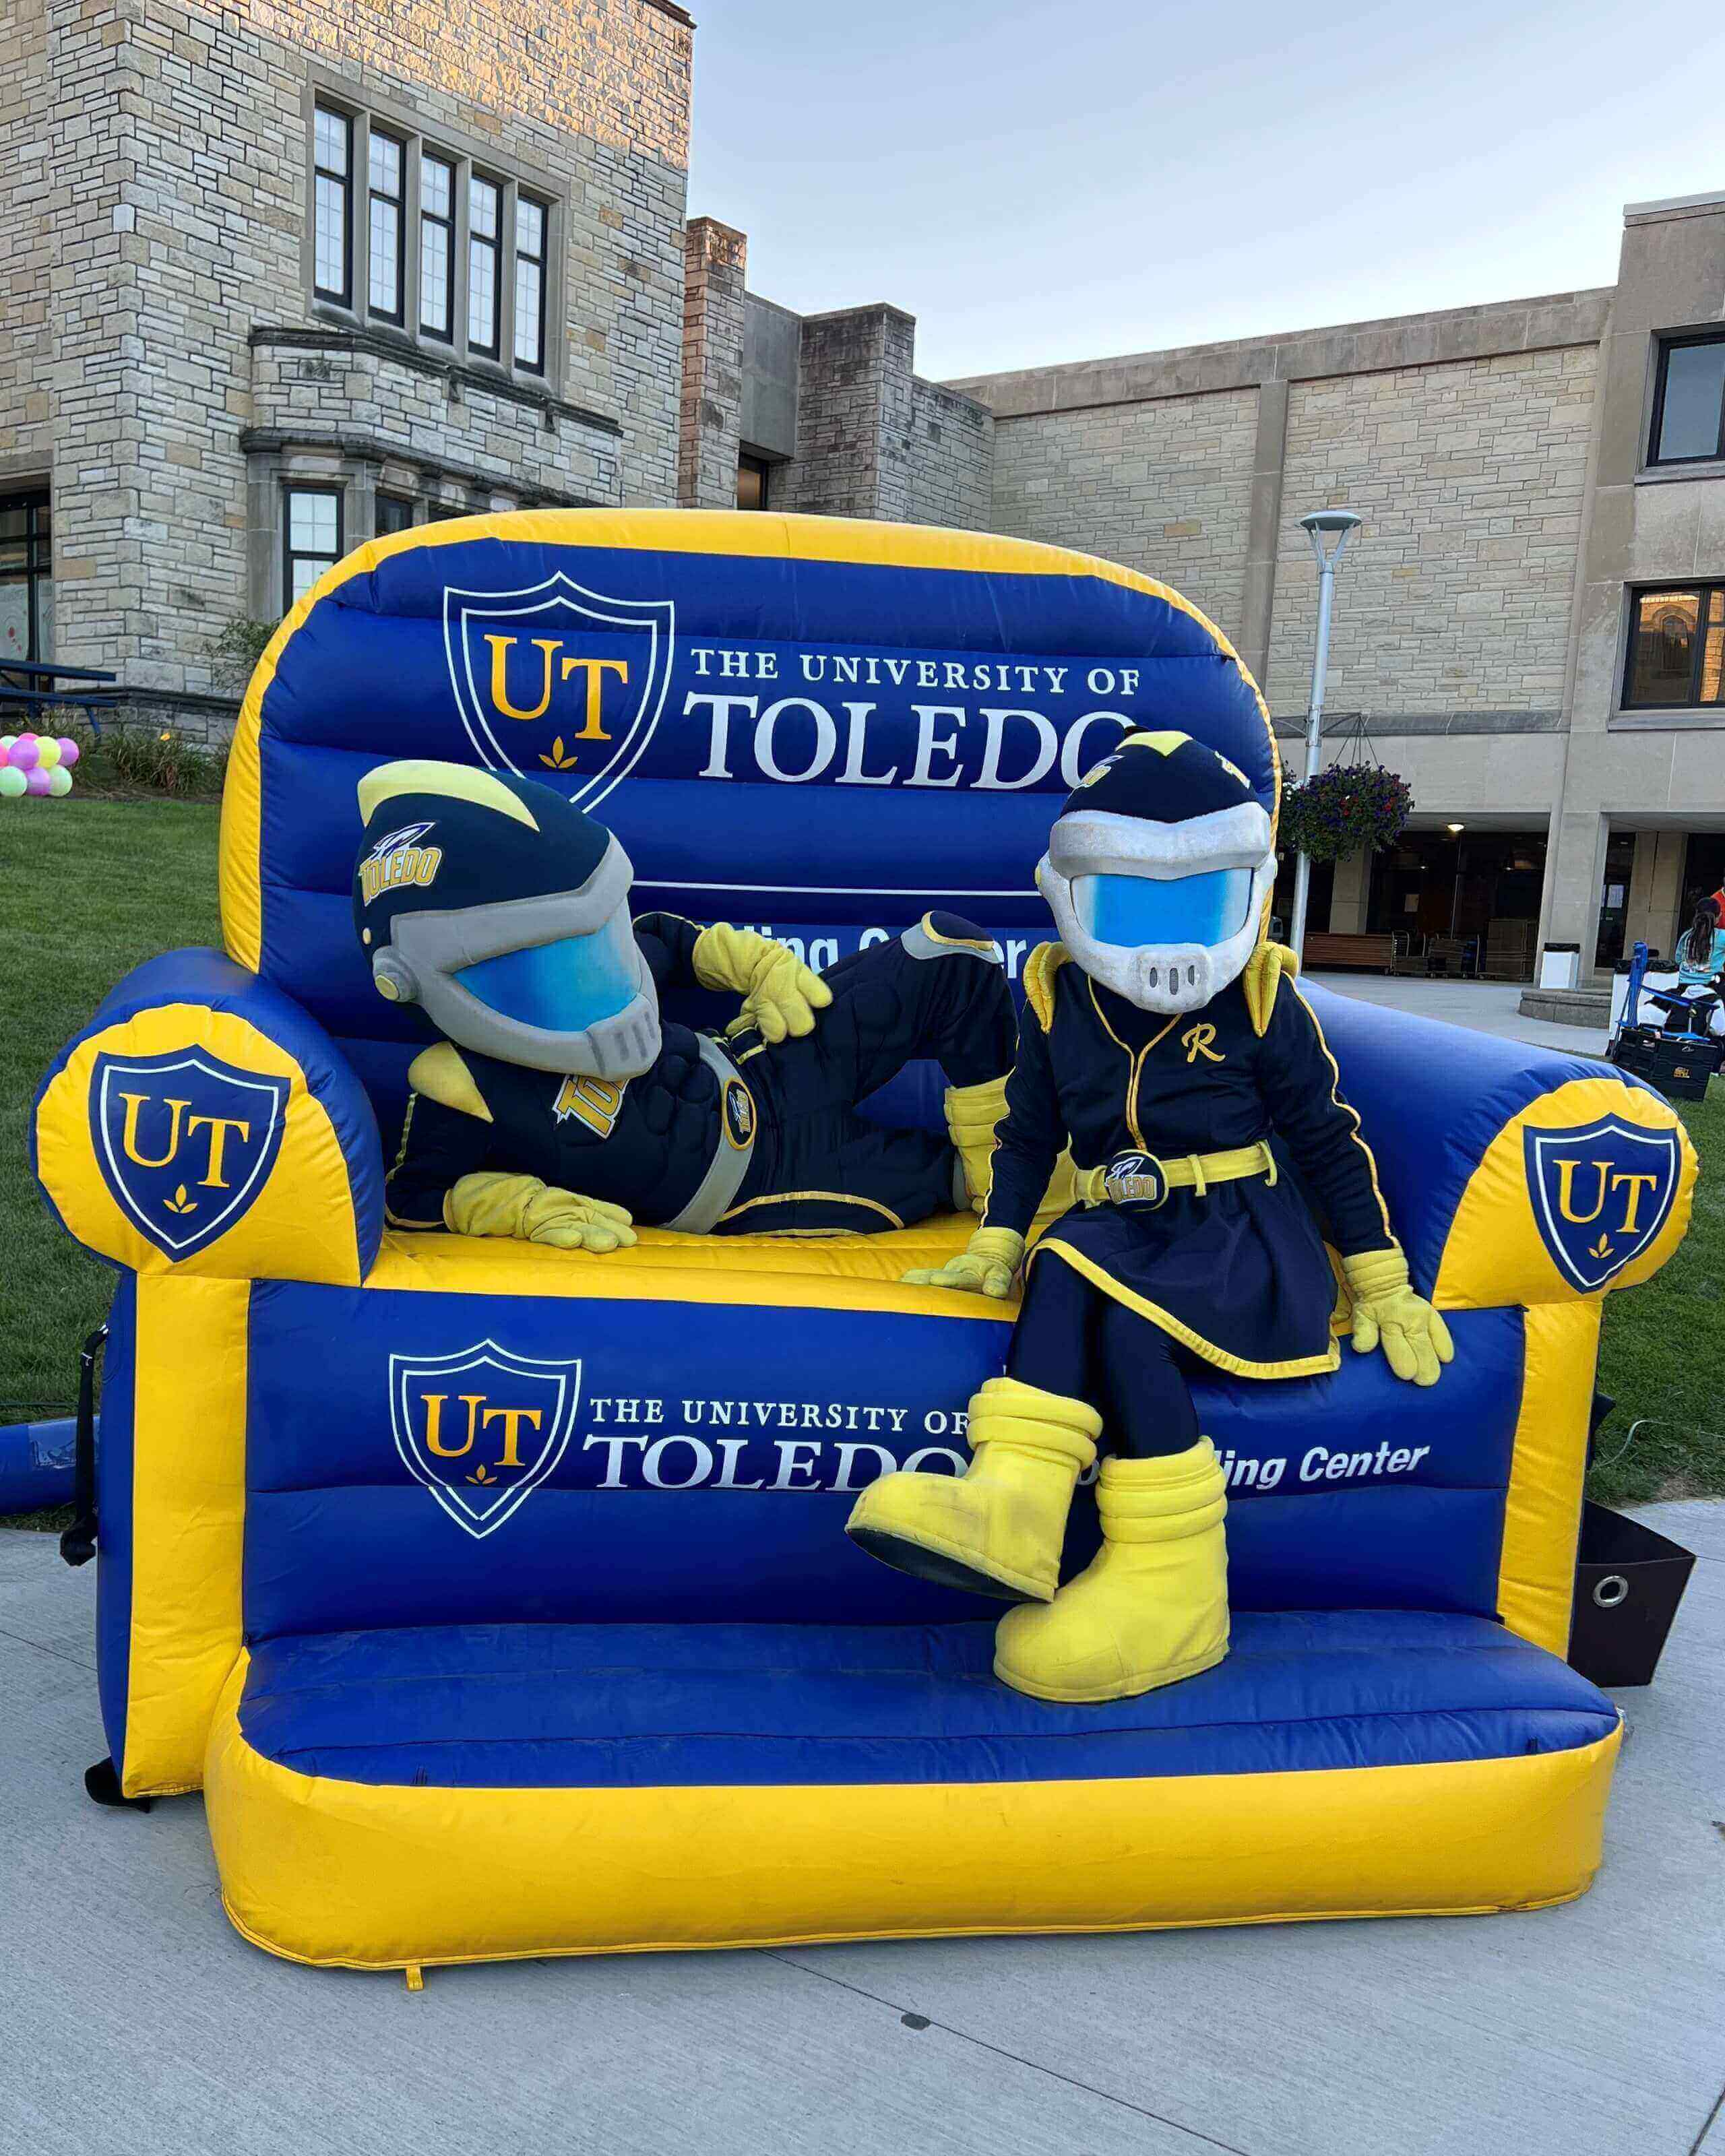 Photo of astranaut type mascots, one male and one female, sitting on a large inflatable blue and yellow university of toledo chair. 